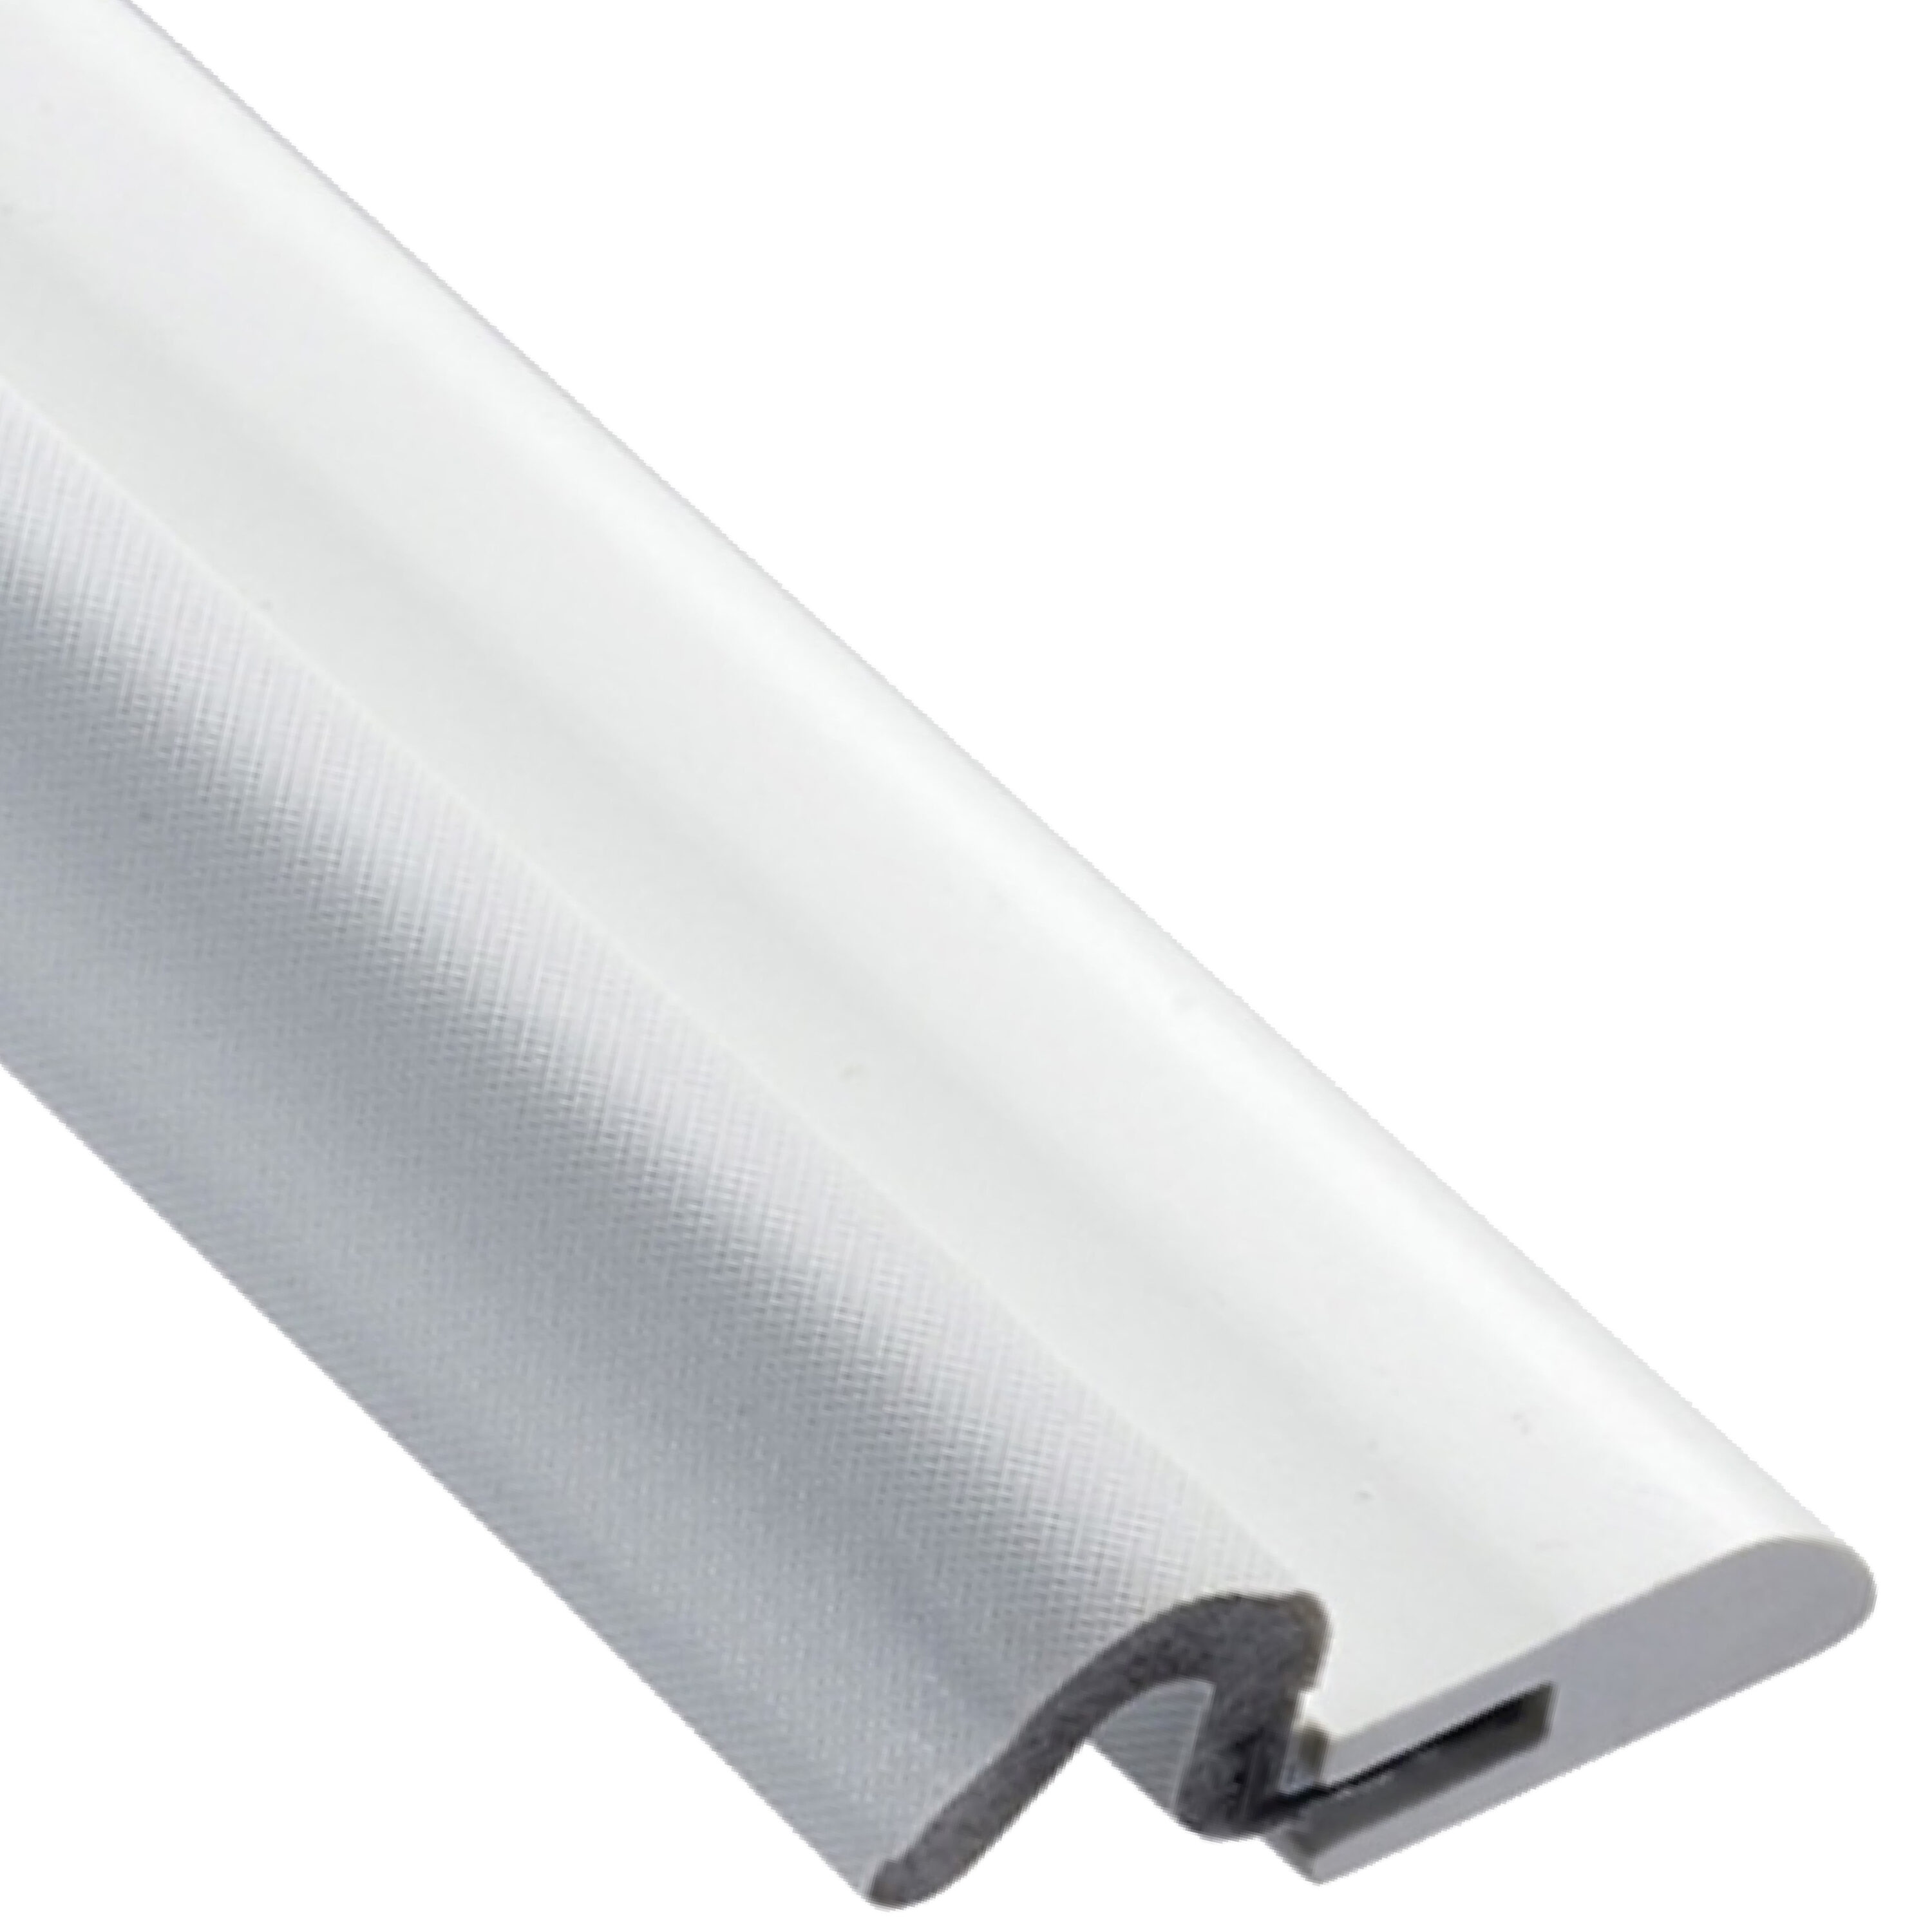 Simply Conserve DS060N-W Windjammer PVC Nail Door Weatherstrip, 0.75, White